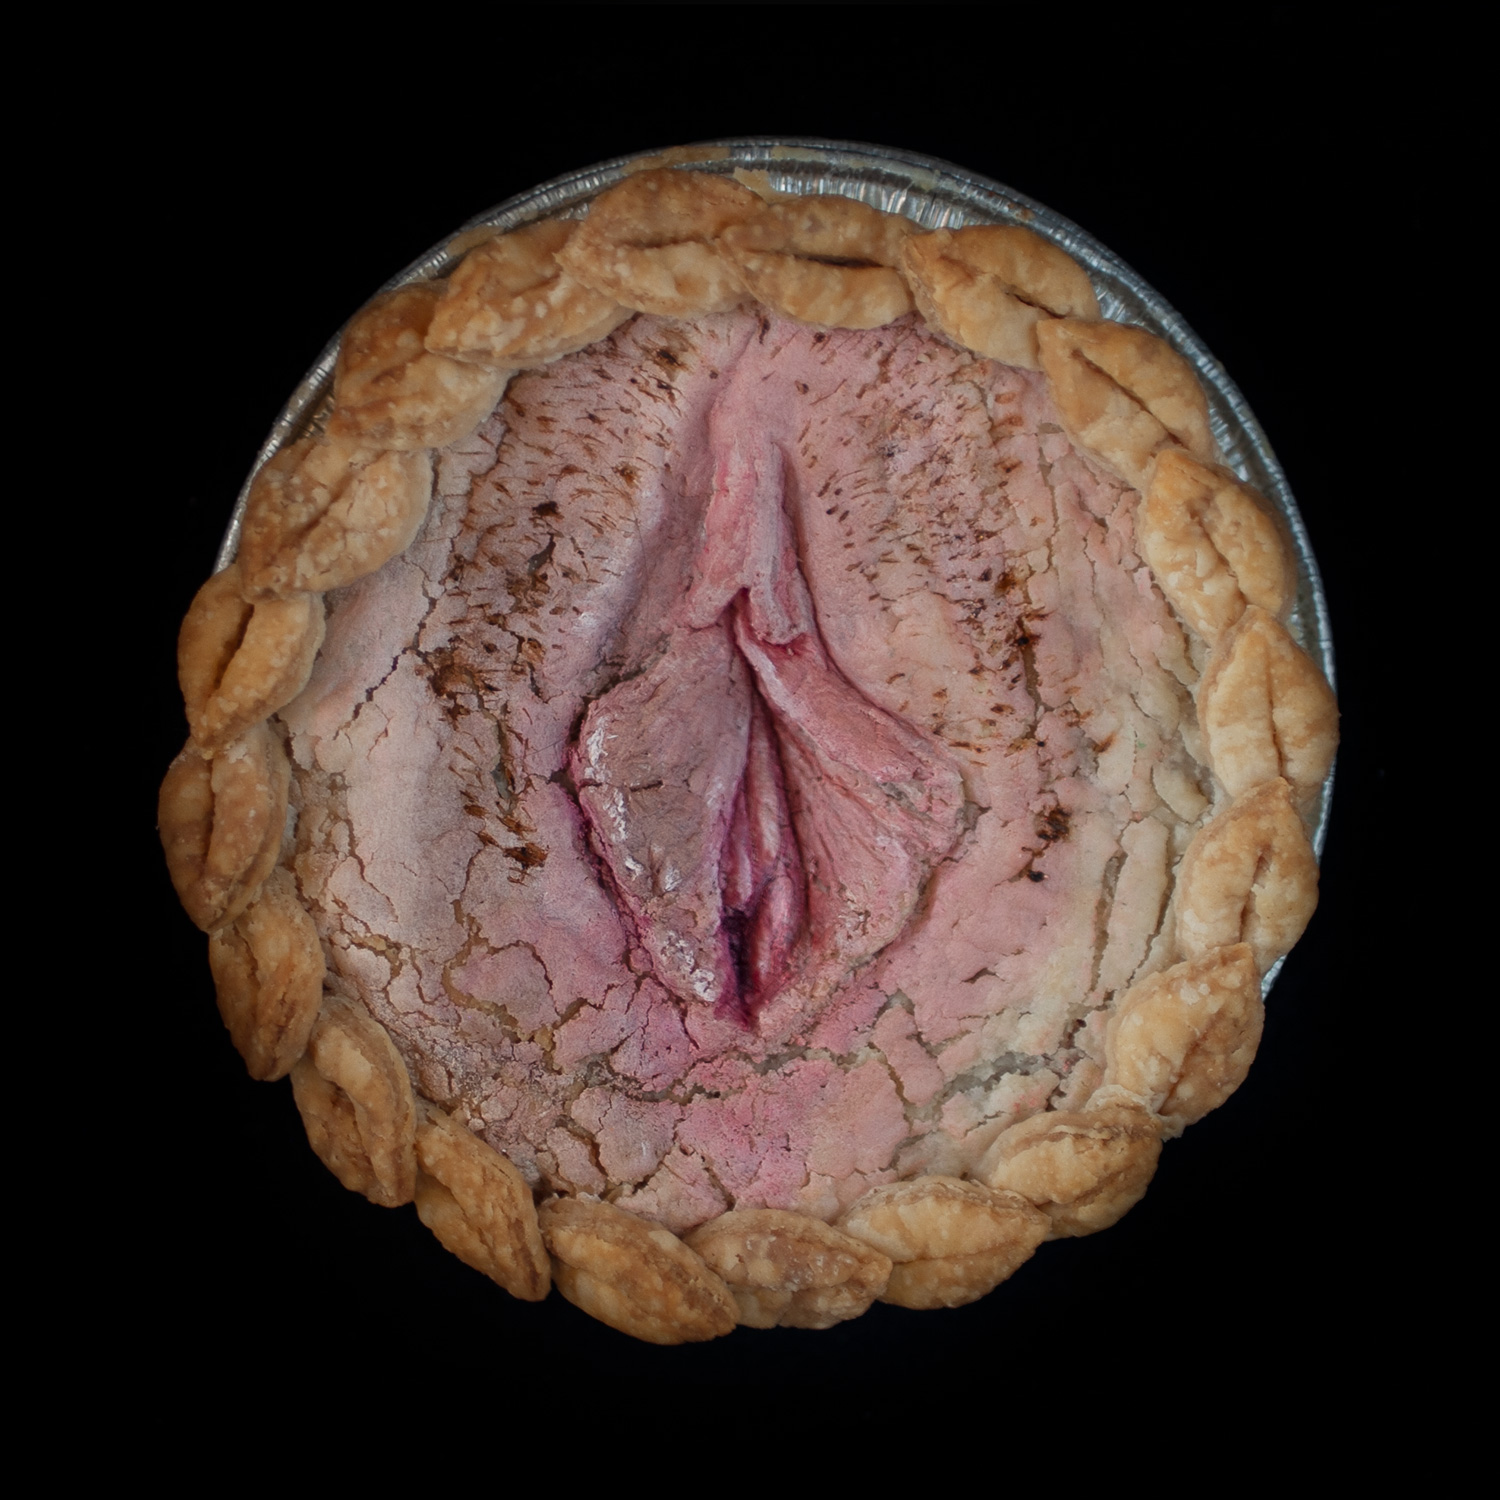 Mini vulva pie on black background with hand sculpted, hand painted vulva art surrounded with pie crust leaves